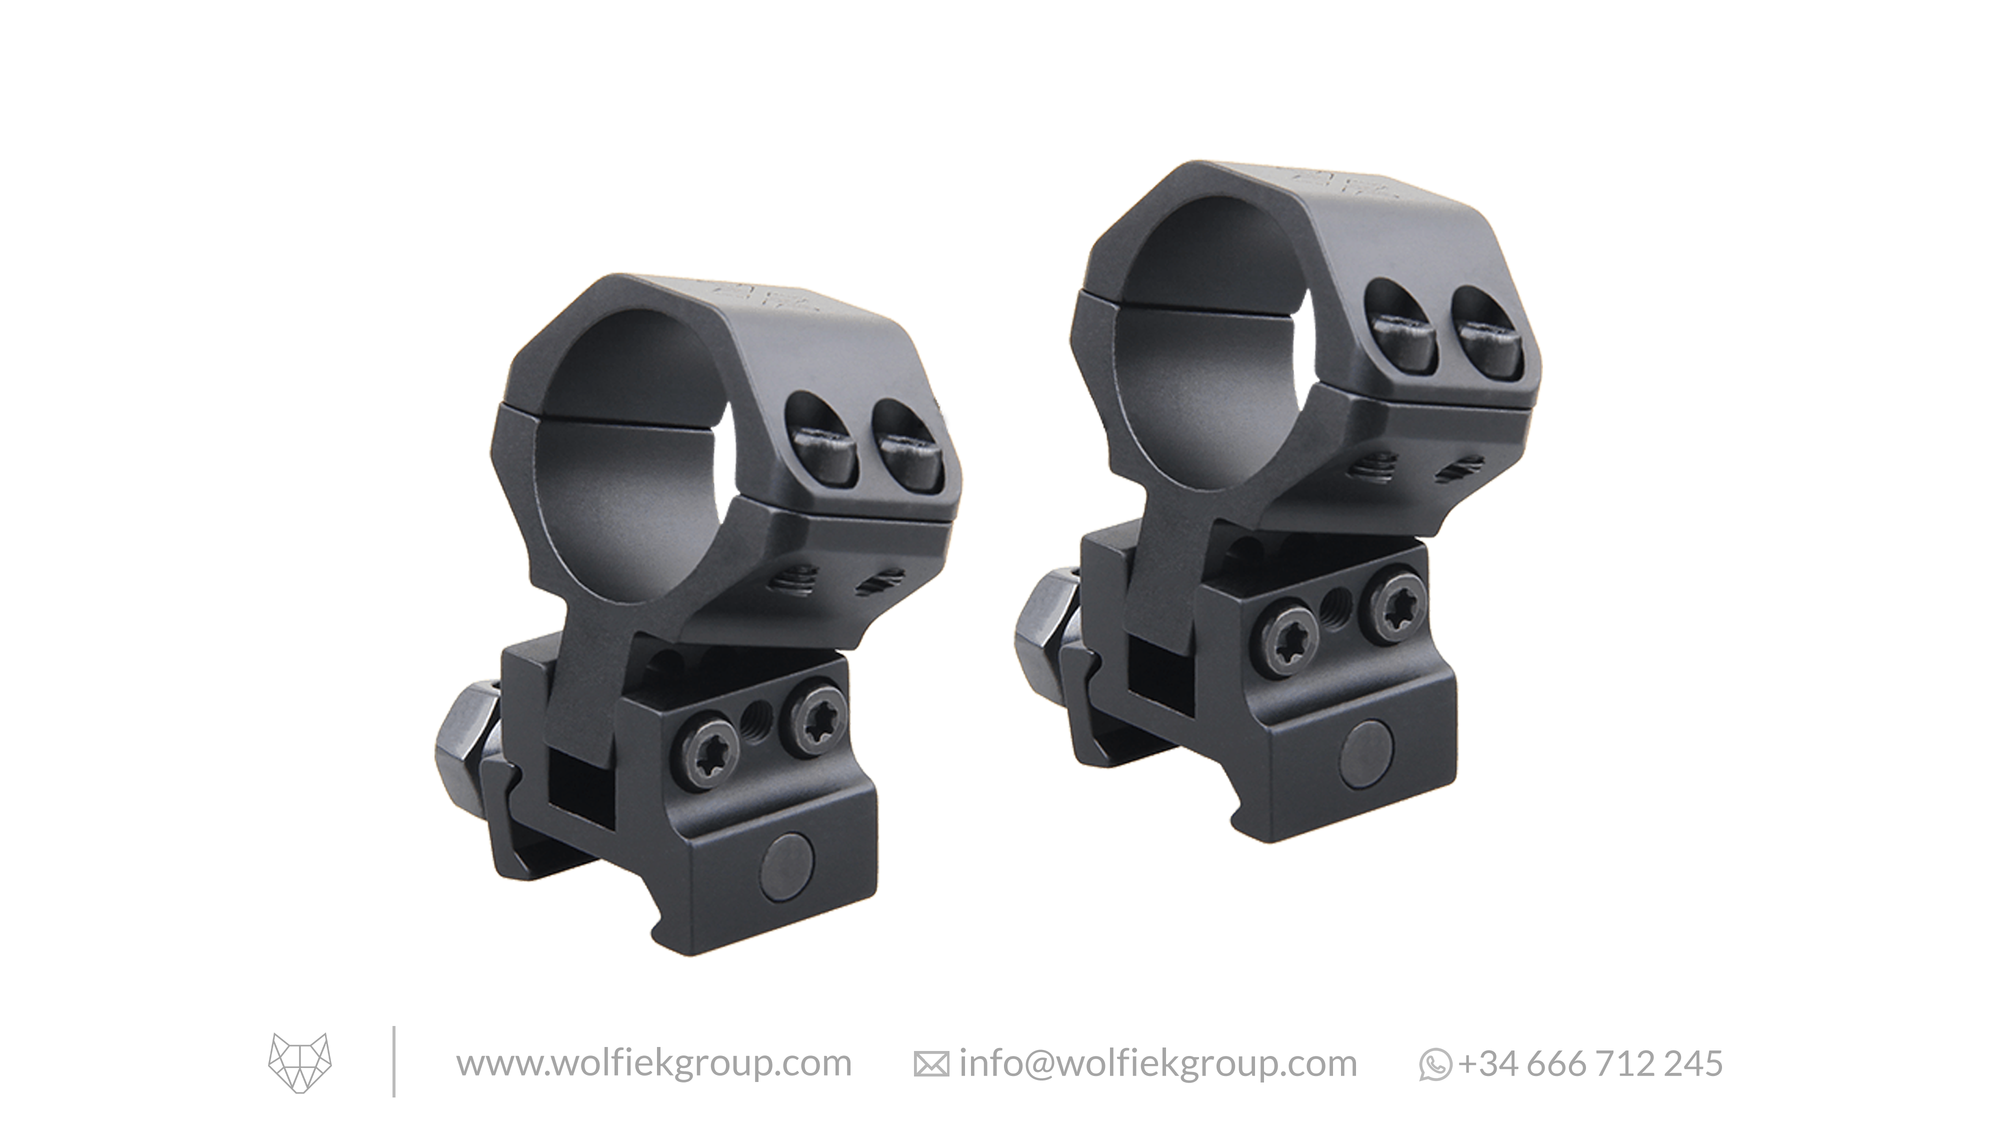 Two adjustable scope mounts in black (lateral)